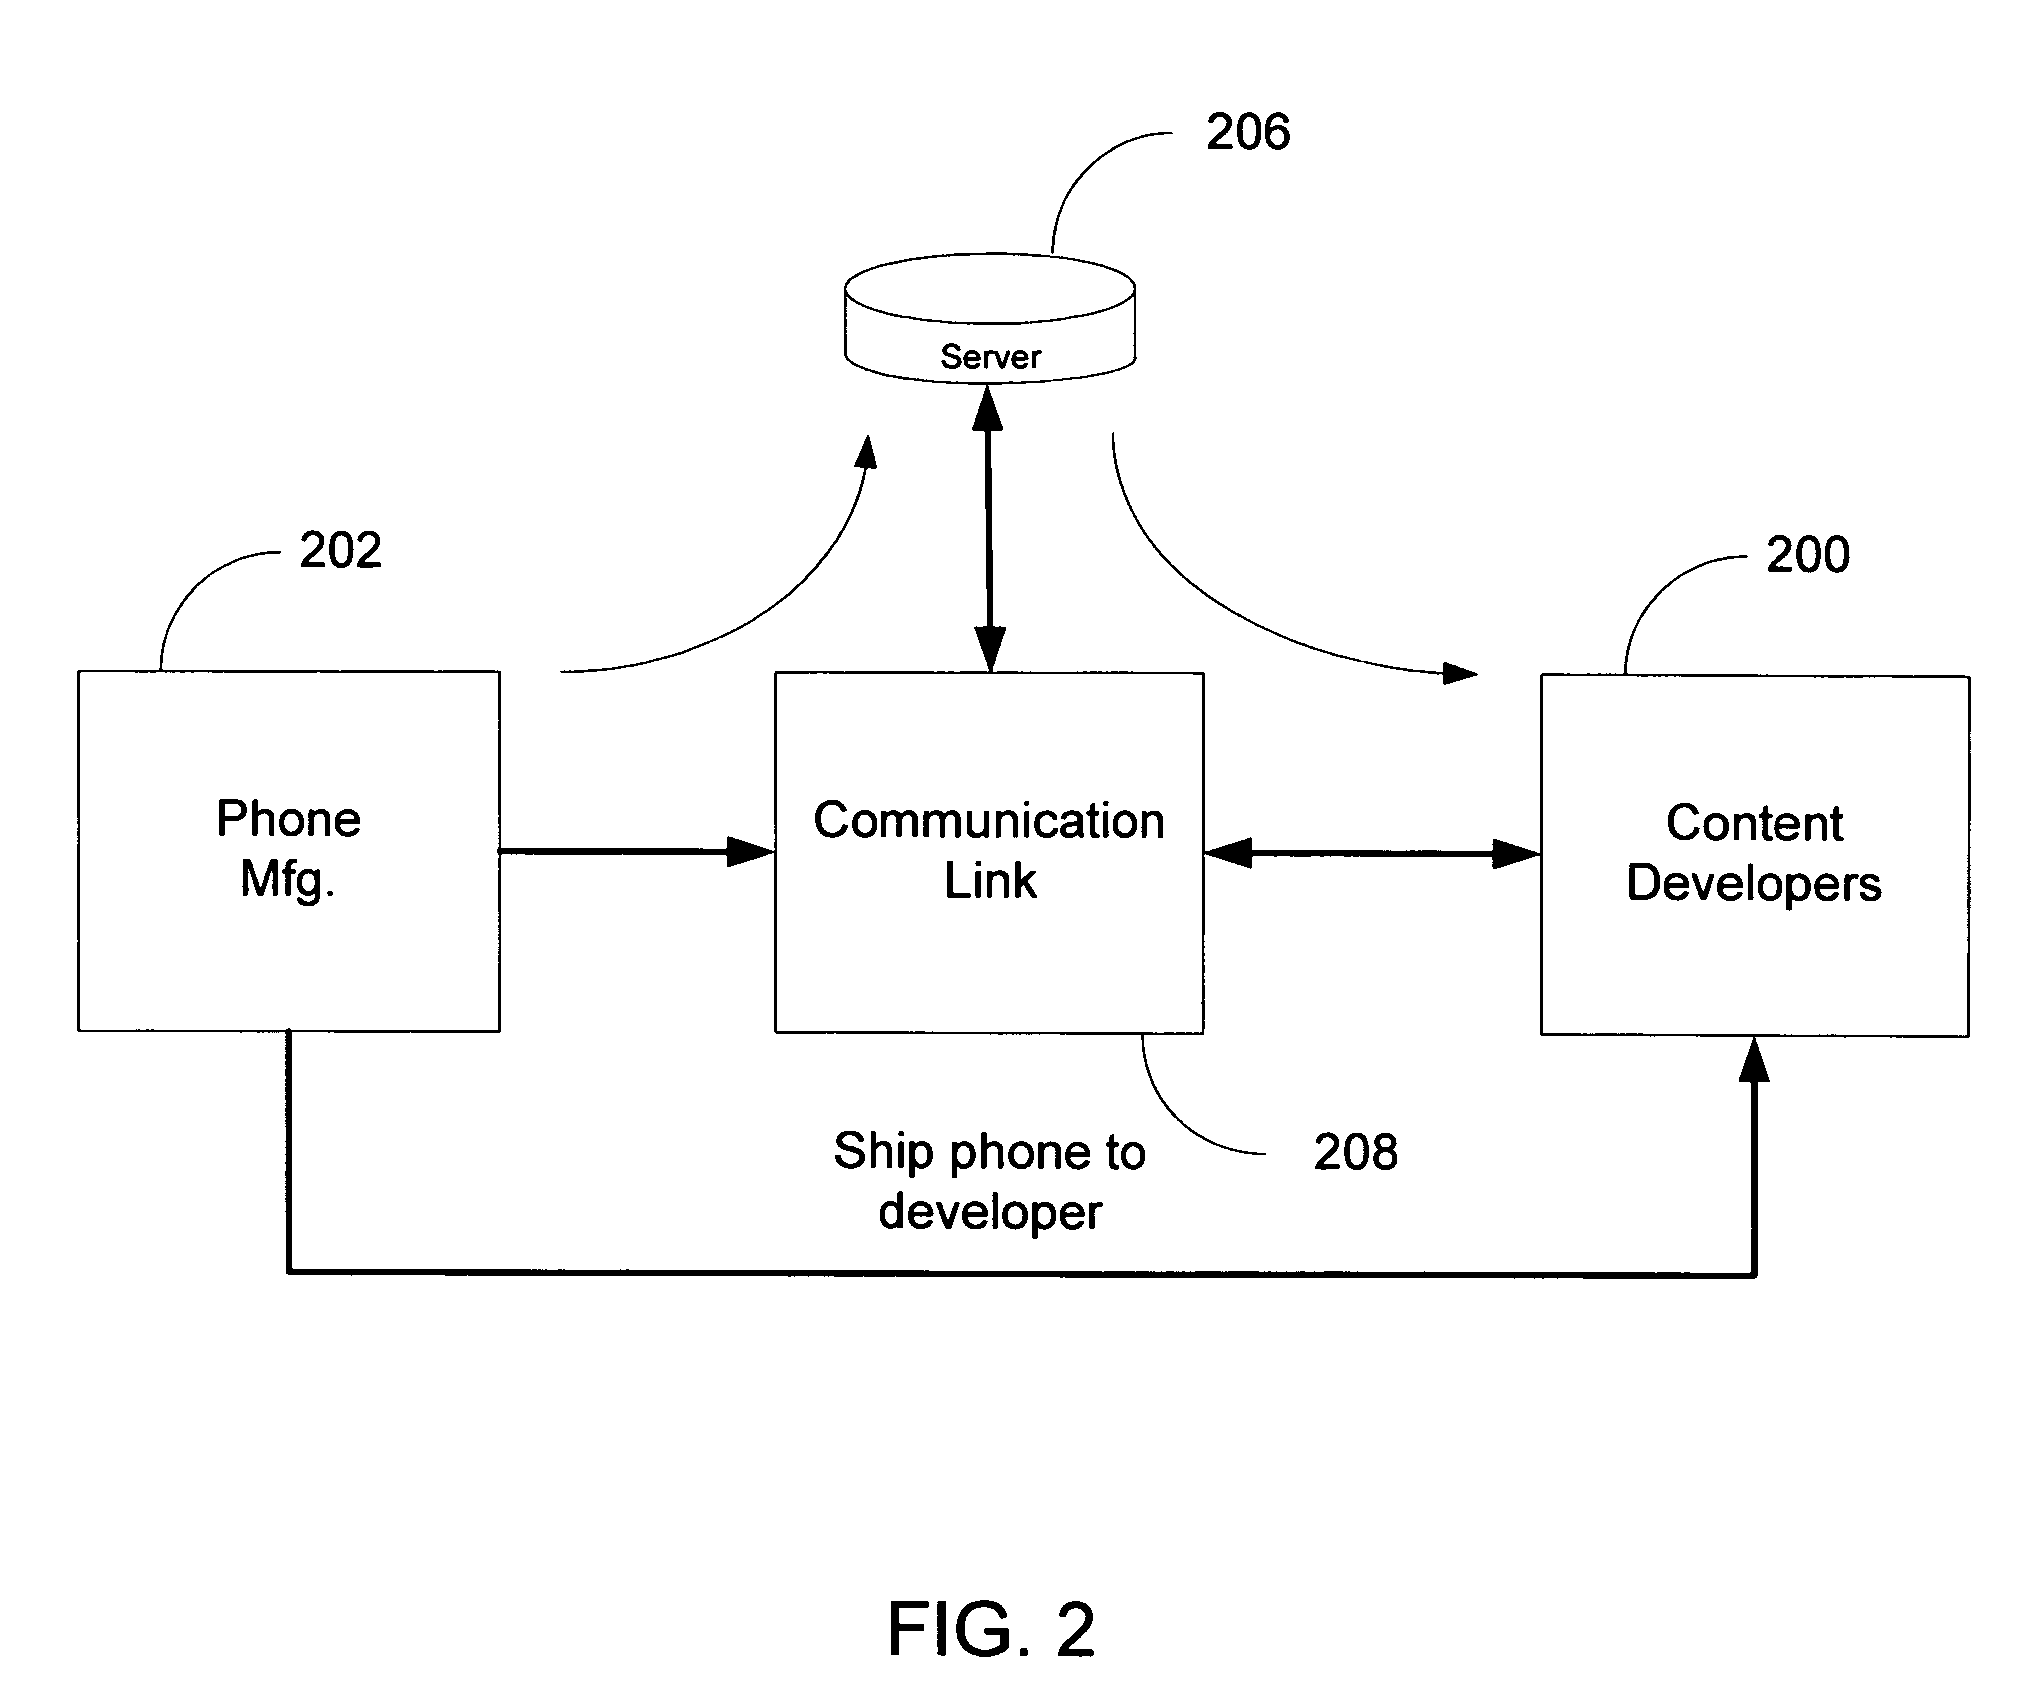 Systems and methods for rapidly enabling brew-based wireless handsets for content development